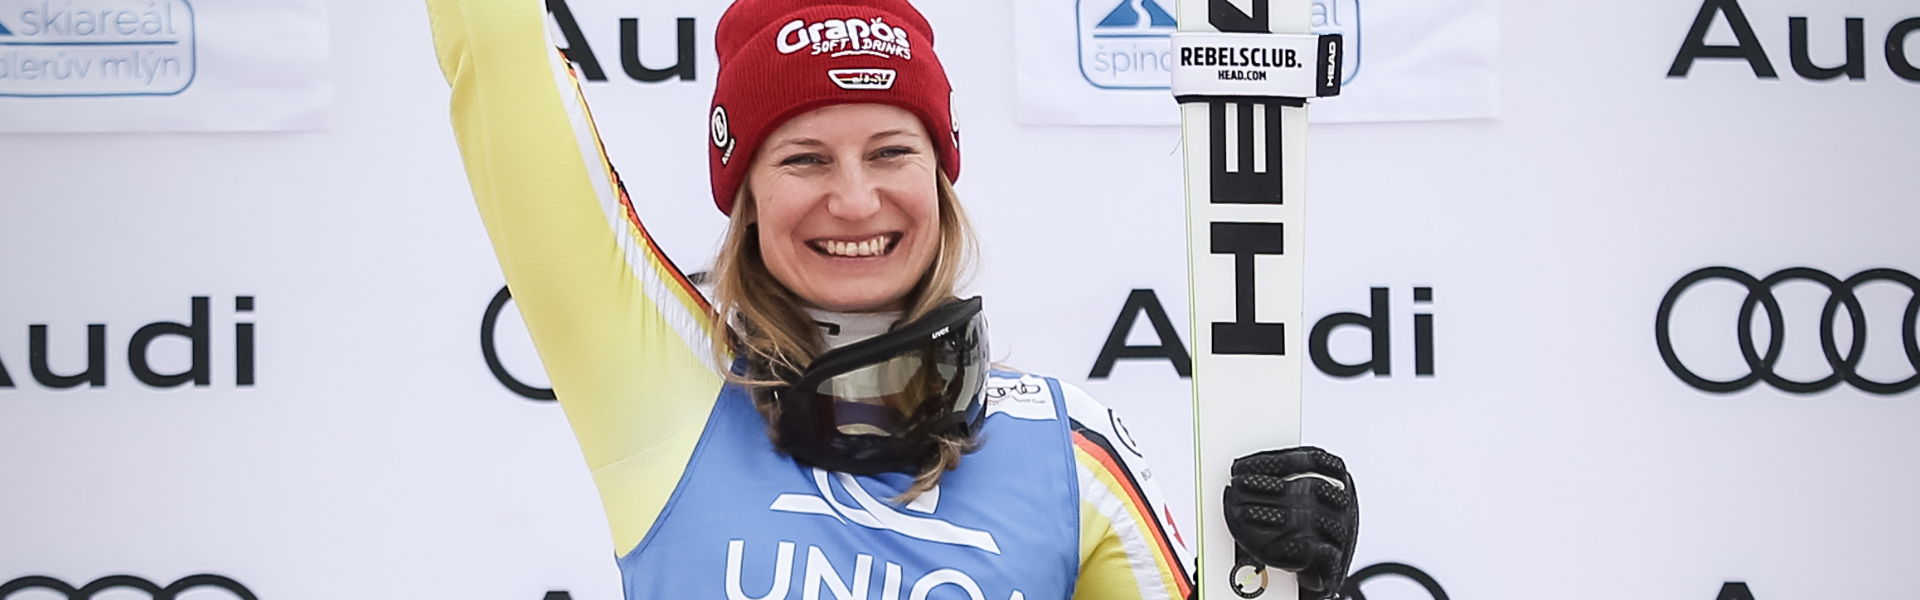 First Slalom World Cup victory for Lena Dürr